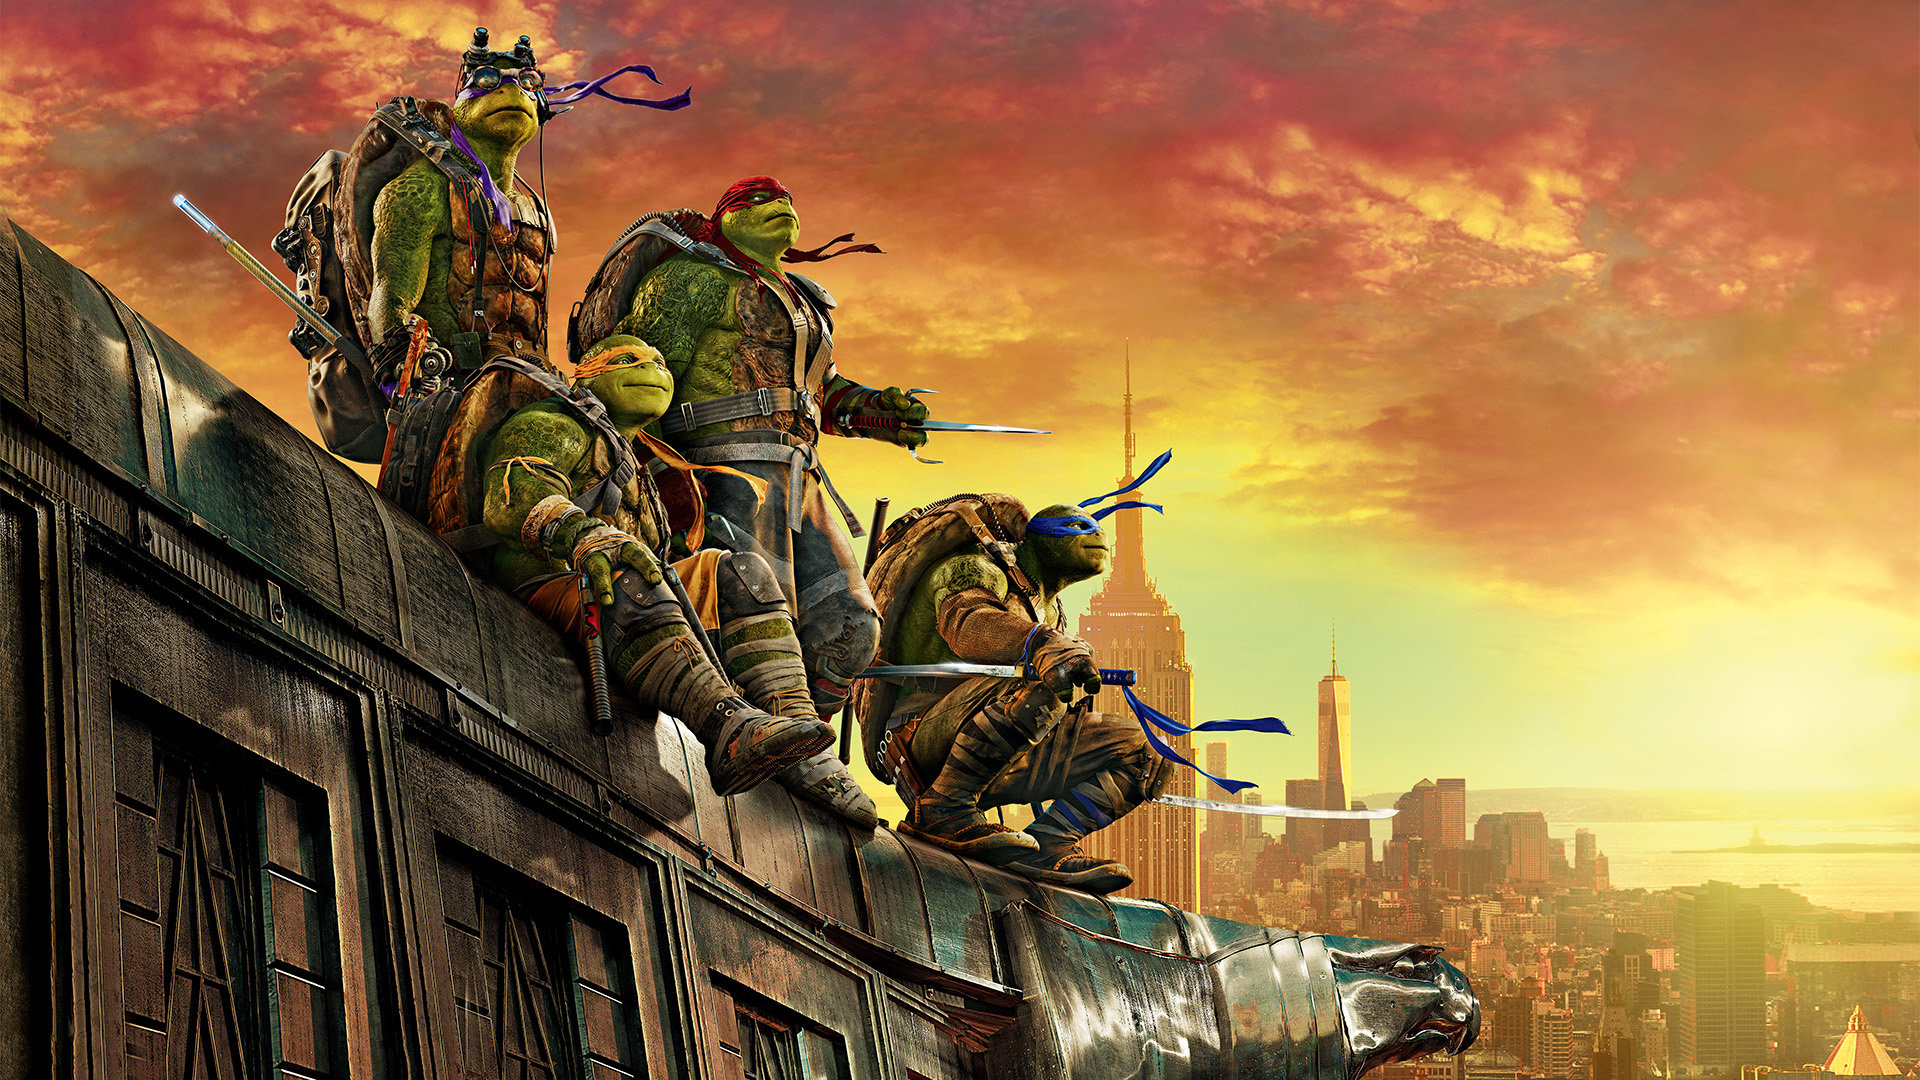 High resolution Teenage Mutant Ninja Turtles (TMNT): Out Of The Shadows full hd 1920x1080 background ID:161097 for desktop